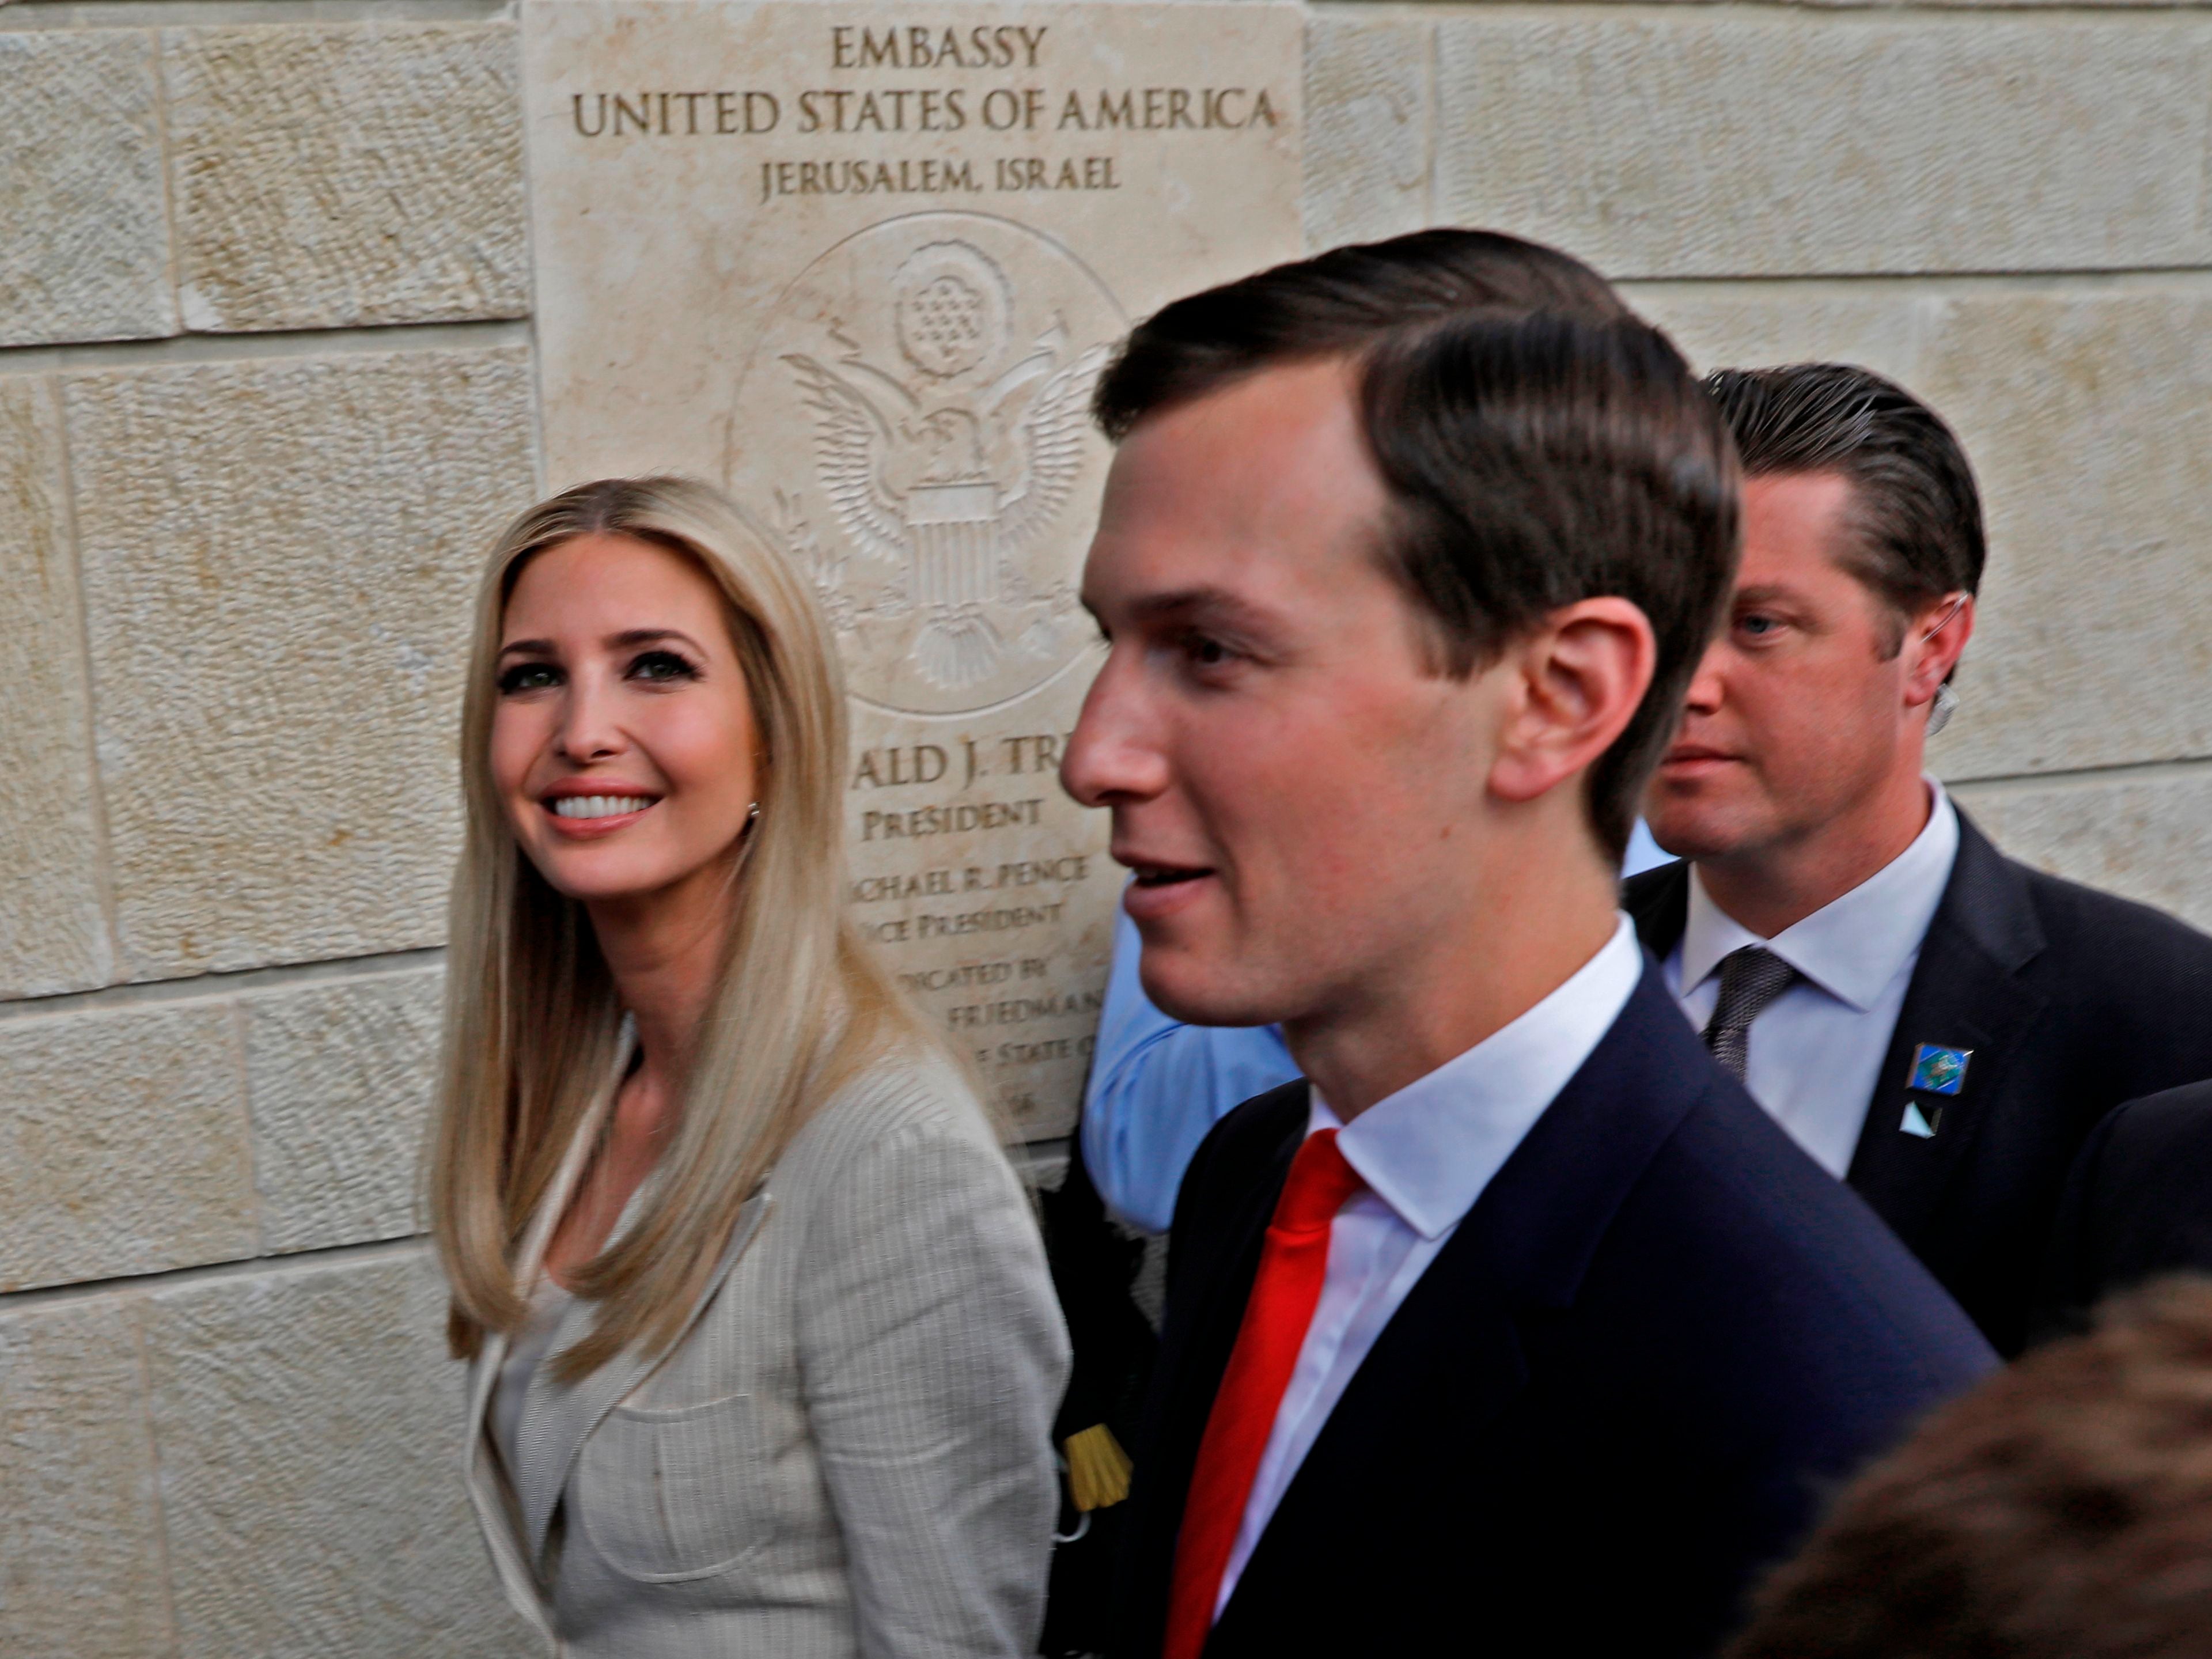 Ivanka Trump and her husband White House advisor Jared Kushner are seen during the opening of the US embassy in Jerusalem, 14 May 2018